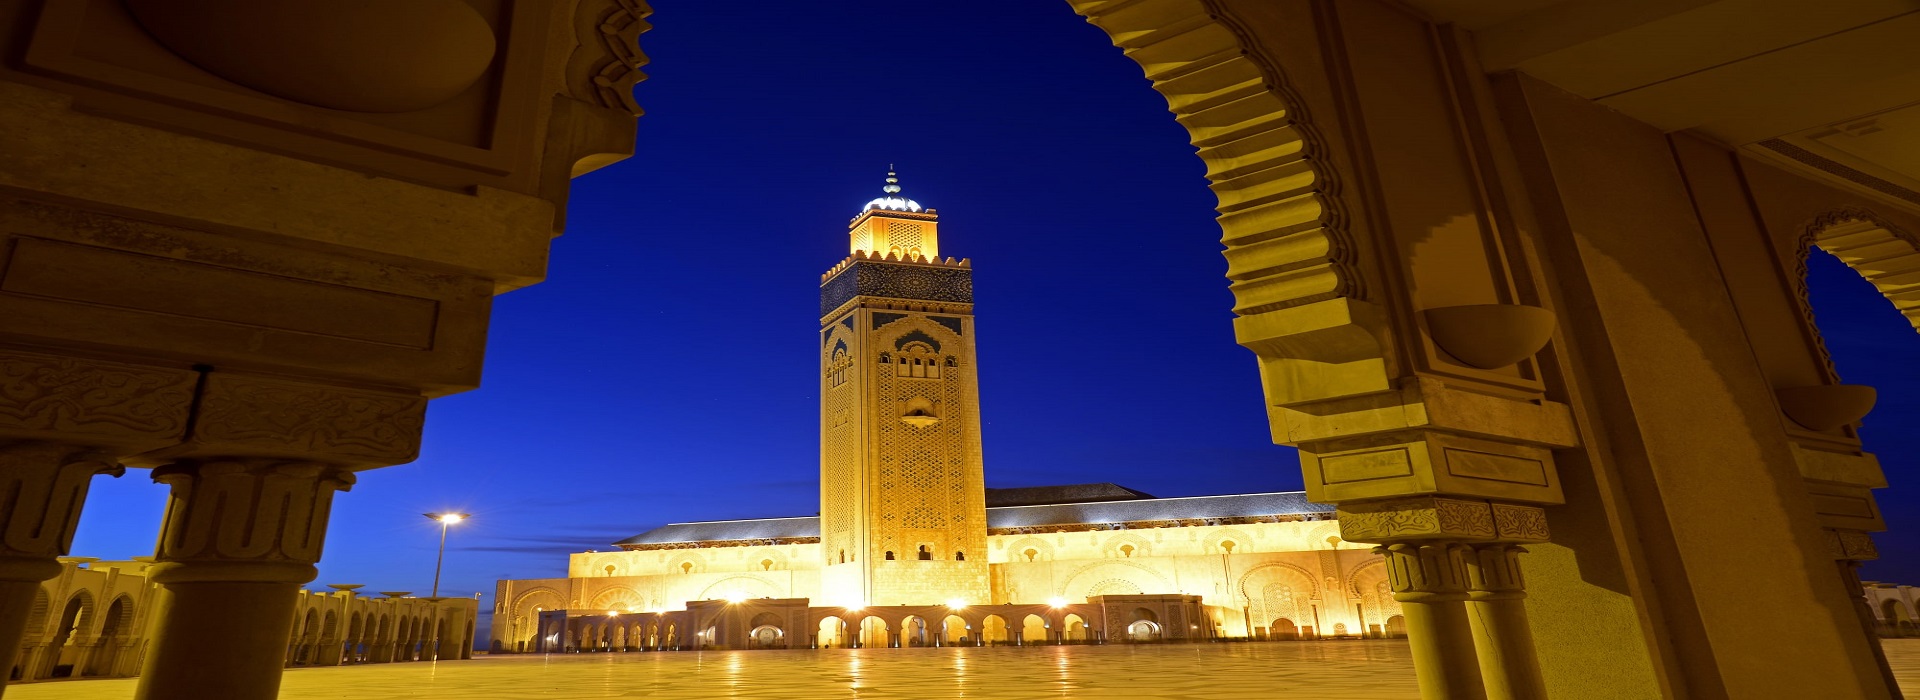 Northern tour from Casablanca